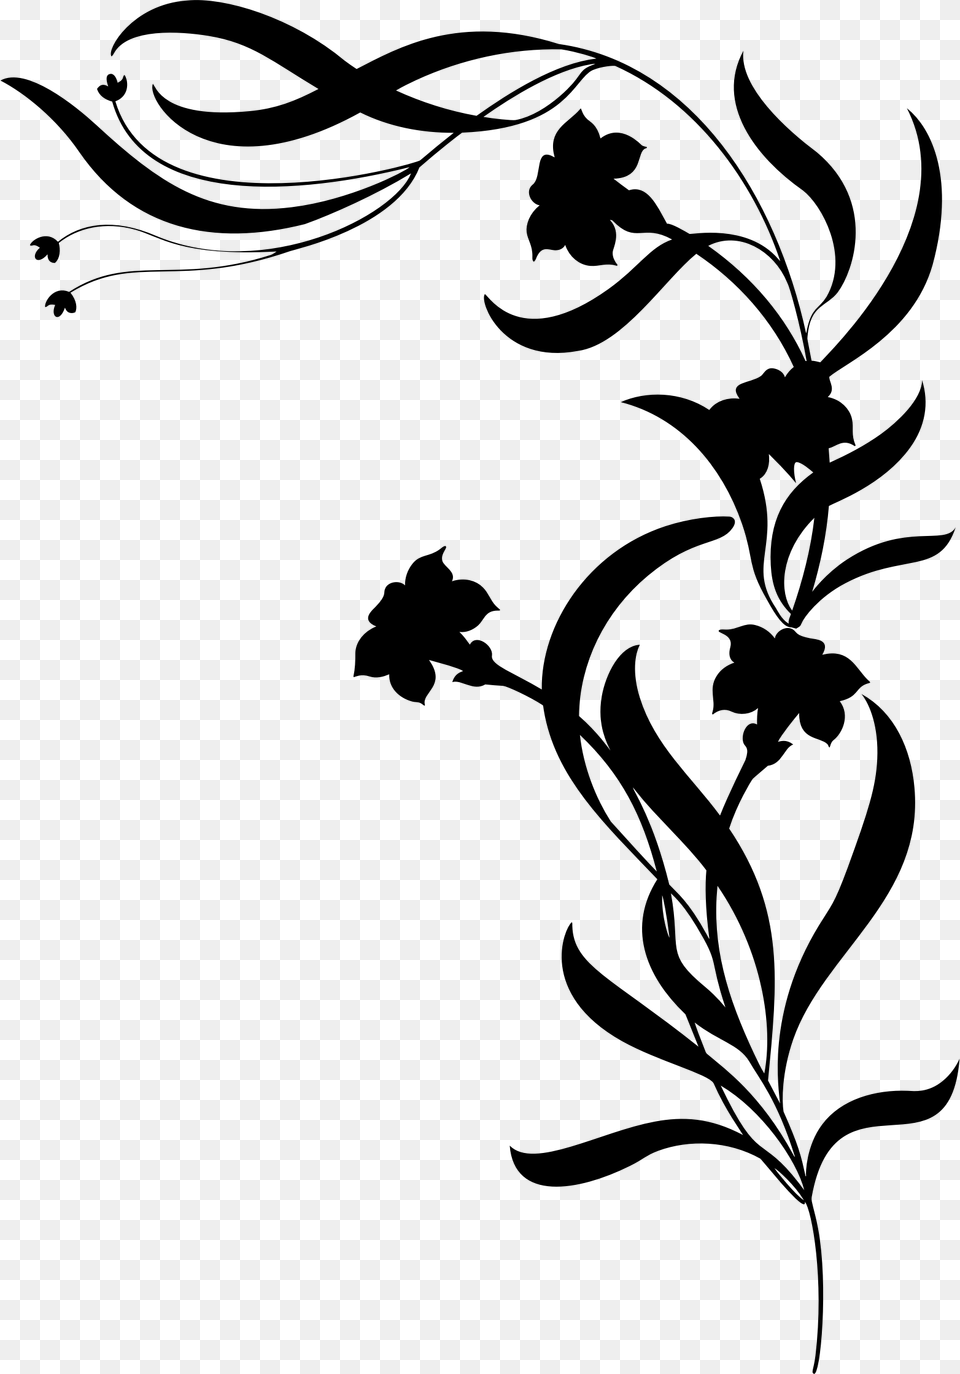 Flower Silhouette Pictures At Getdrawings Flower Vine Clip Art Black And White, Gray Png